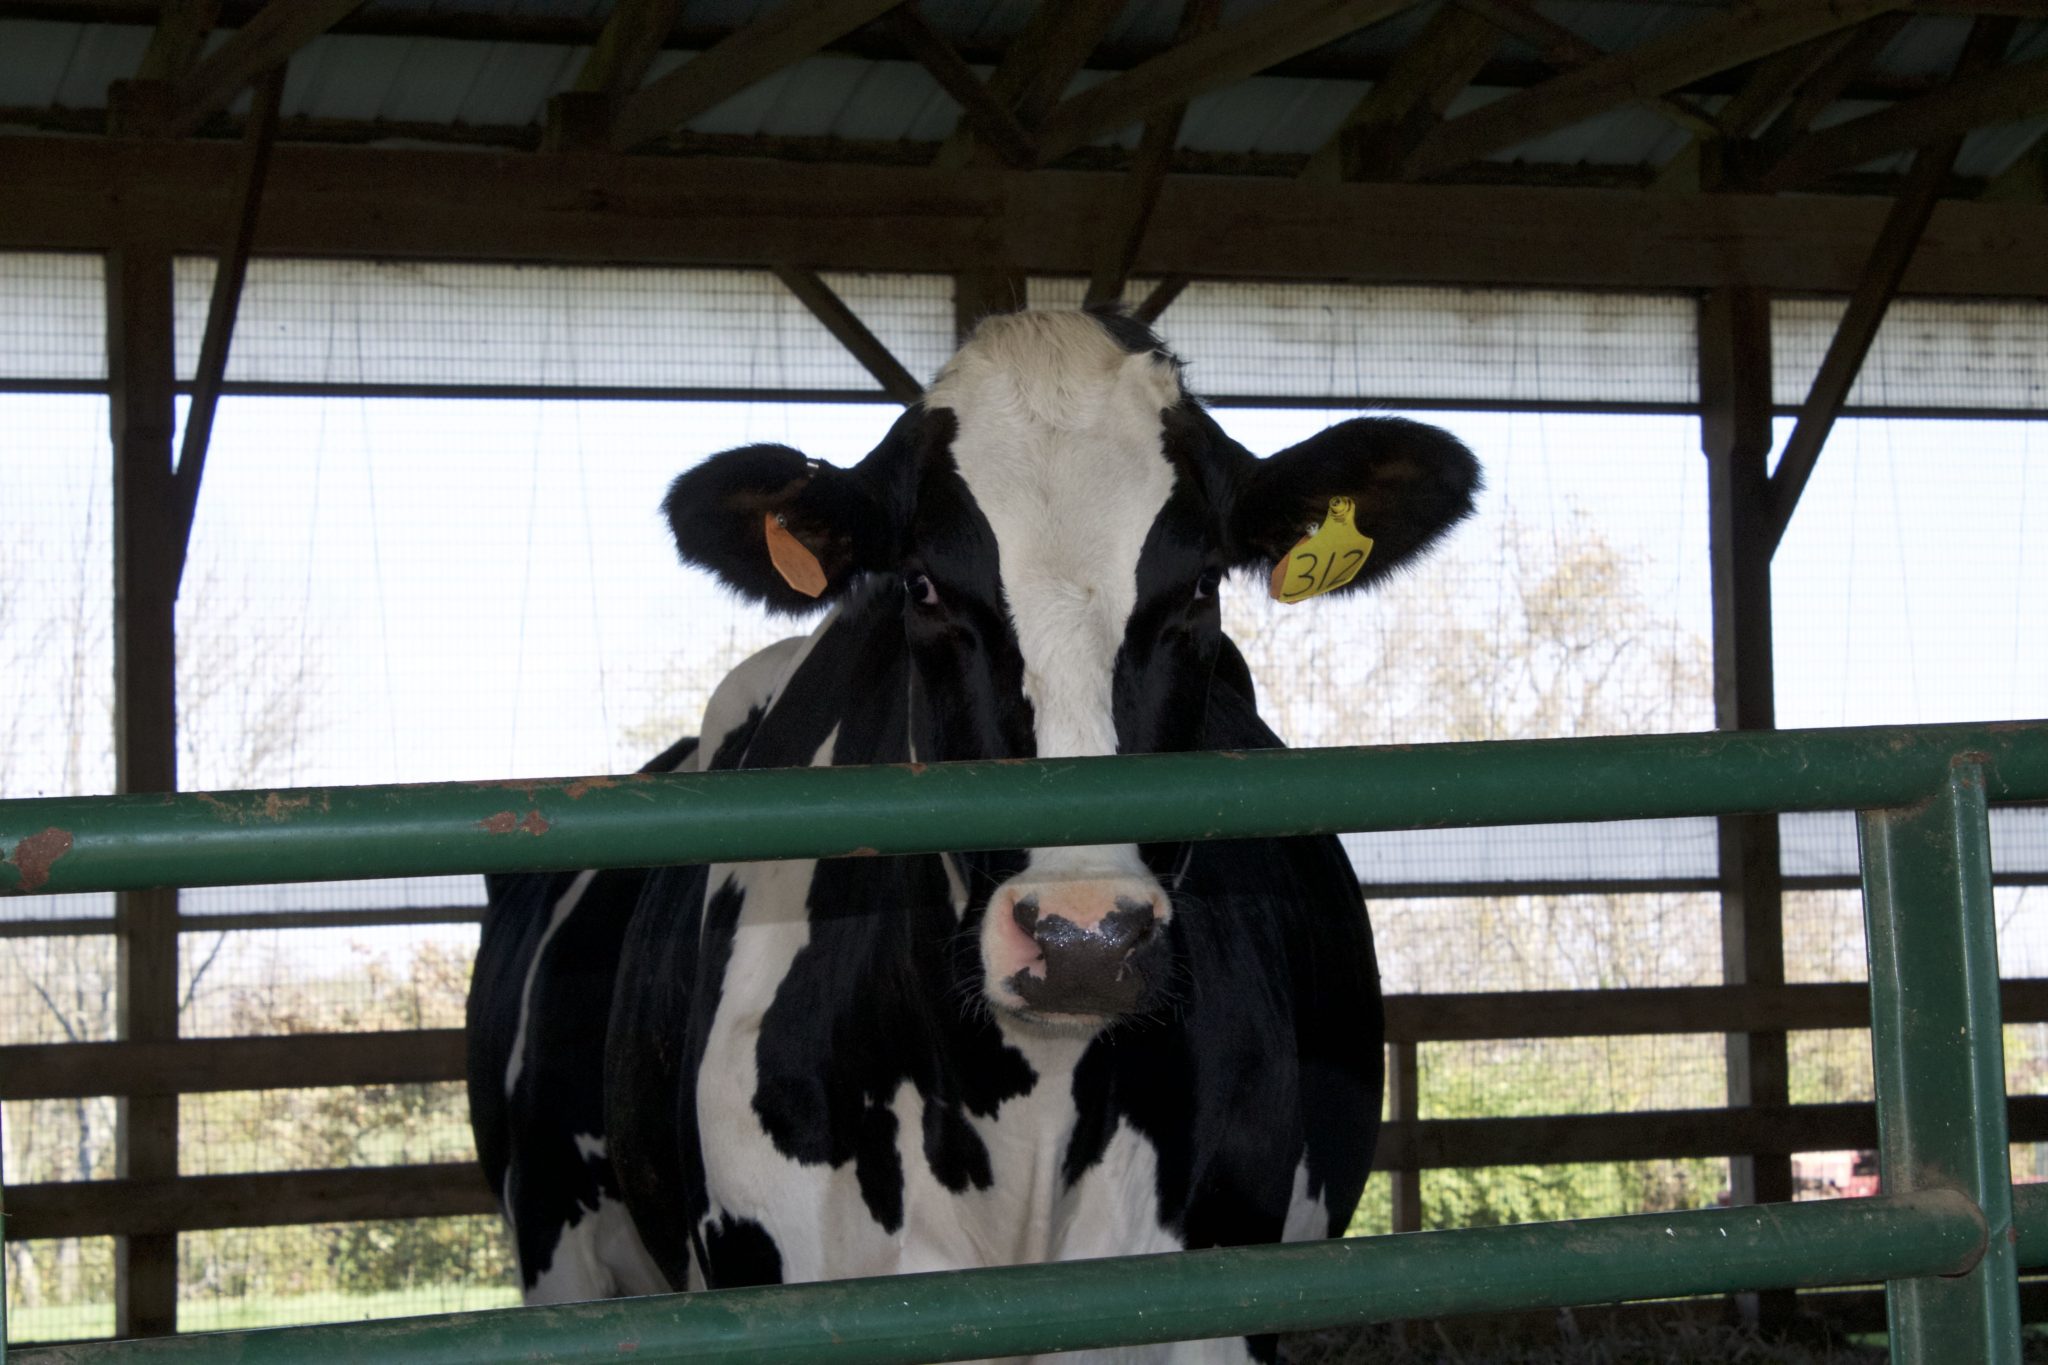 Visit to Ed-Mar Dairy, a local dairy farm in Northern Kentucky is a tour you're gonna want to see. These Holsteins make the best cheese around!